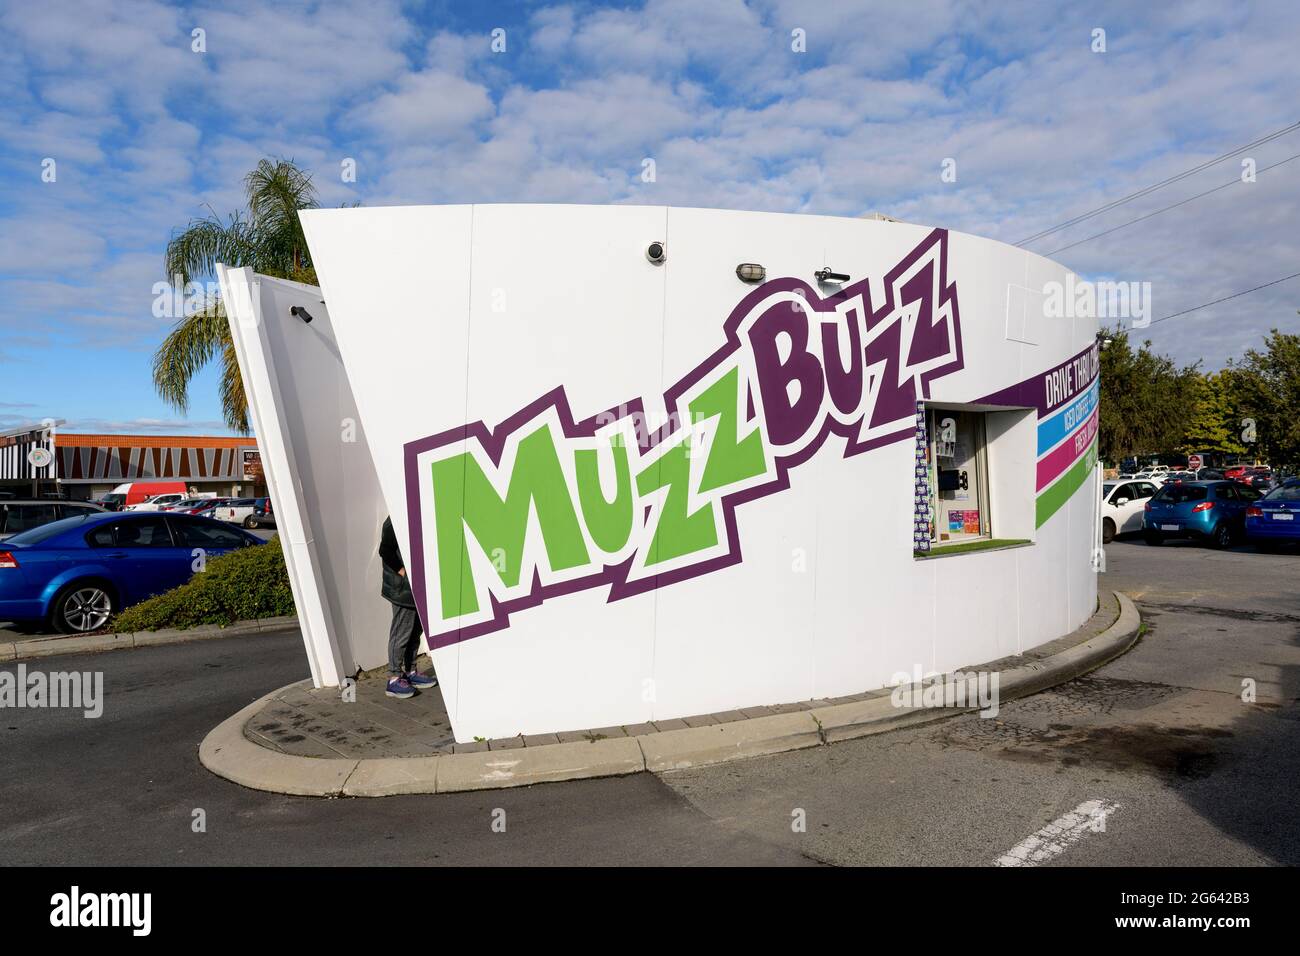 A Muzz Buzz outlet. Muzz Buzz is an Australian owned and operated drive-through coffee franchise chain, originating in Perth, Western Australia. Stock Photo